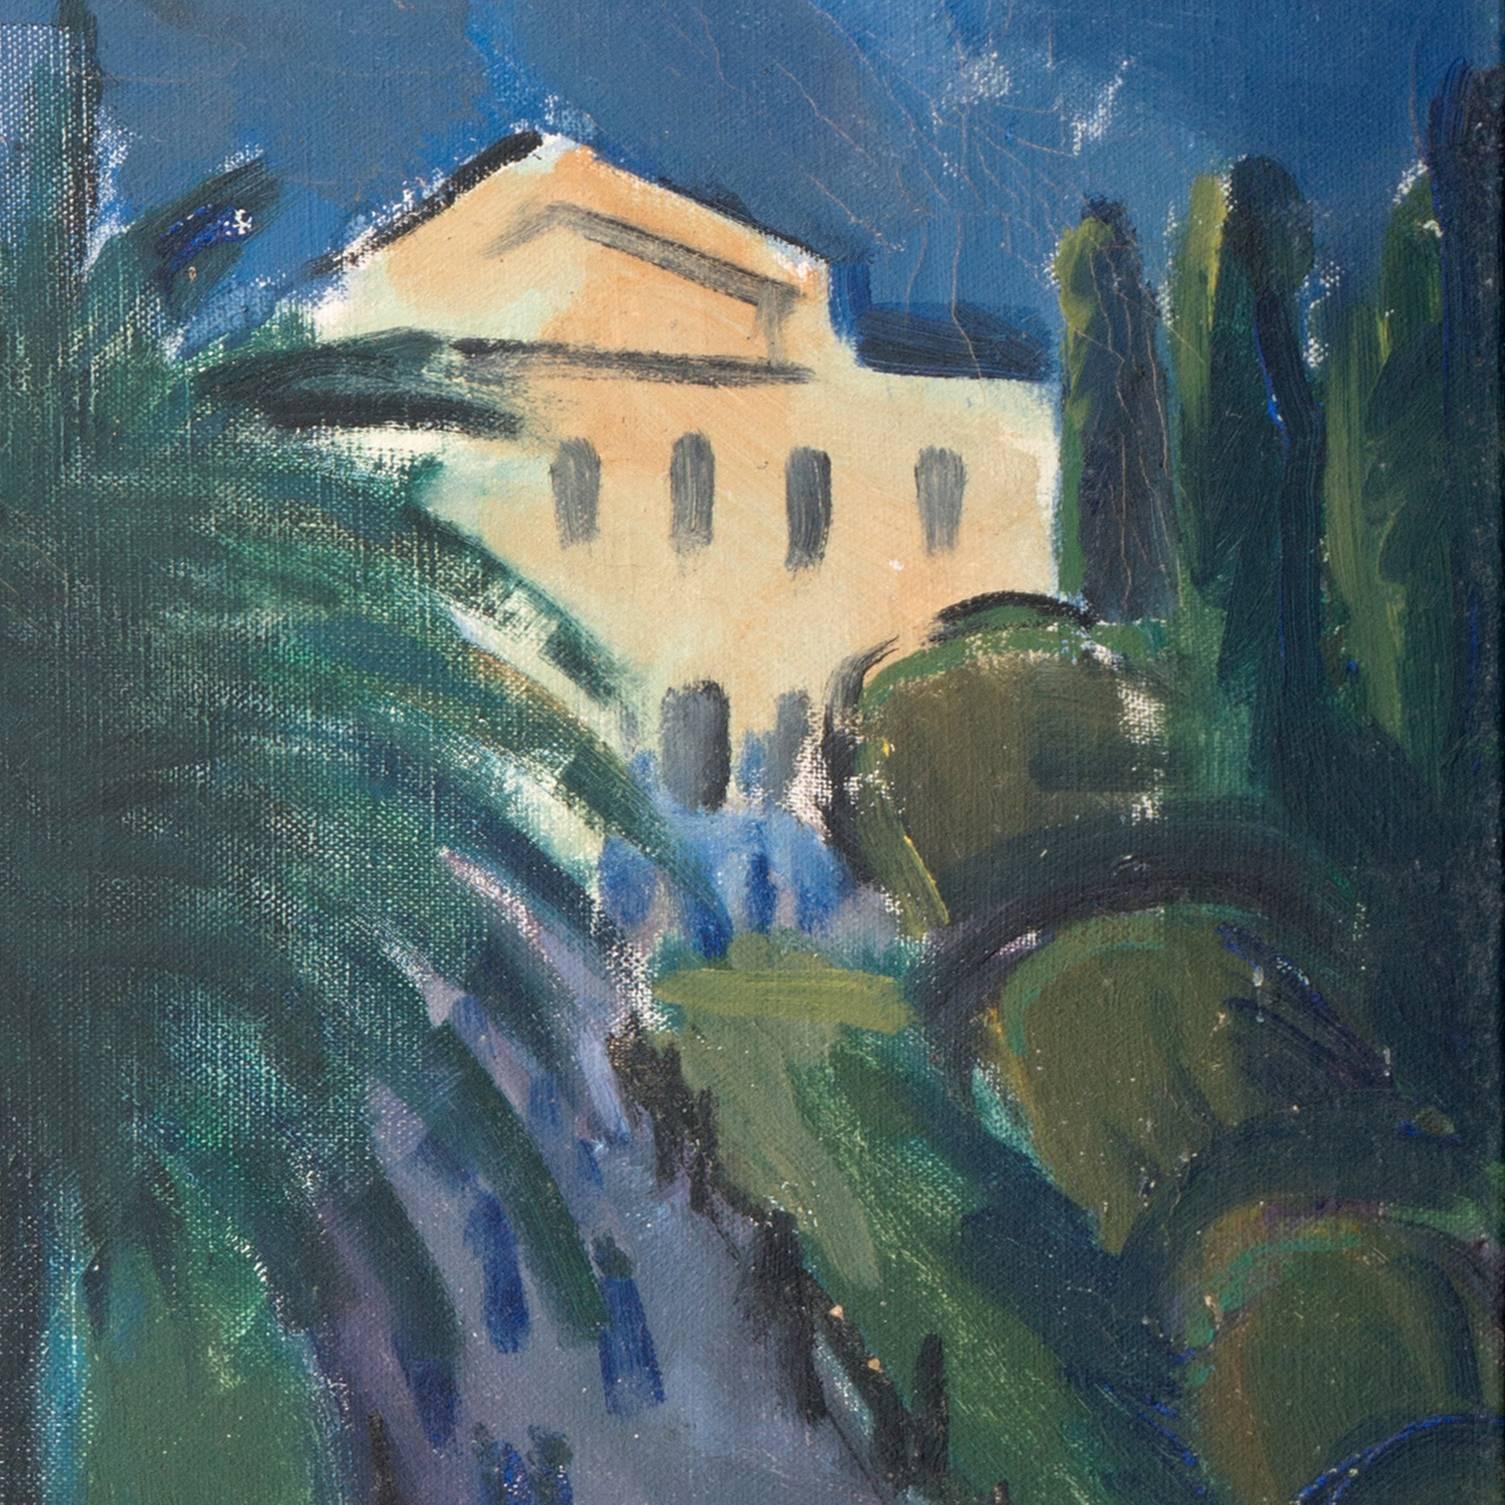 Signed lower right and dated 1932. 

An early twentieth-century oil cityscape showing a view of a palm-tree lined boulevard in the city of Athens, Greece.

Nielsen began his studies at Kristian Zahrtmann’s art school in 1899, and exhibited for